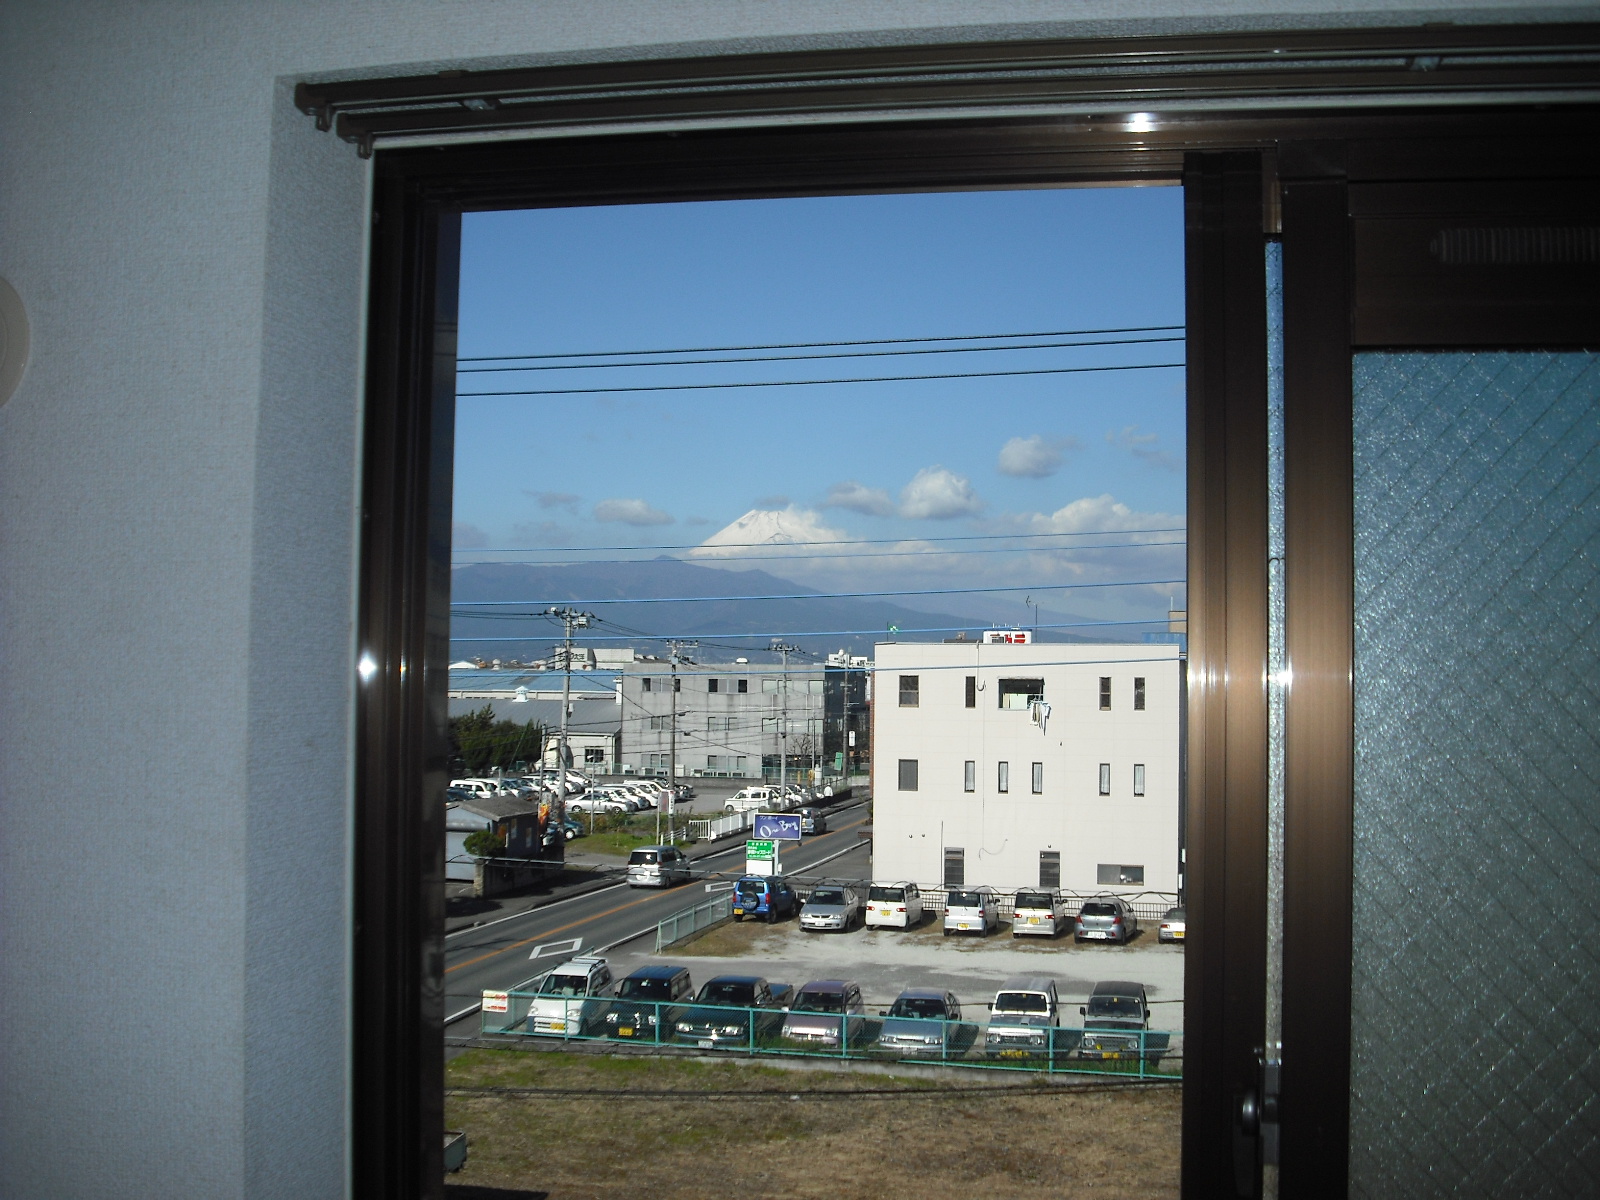 View. From the north Western-style E watched Fuji